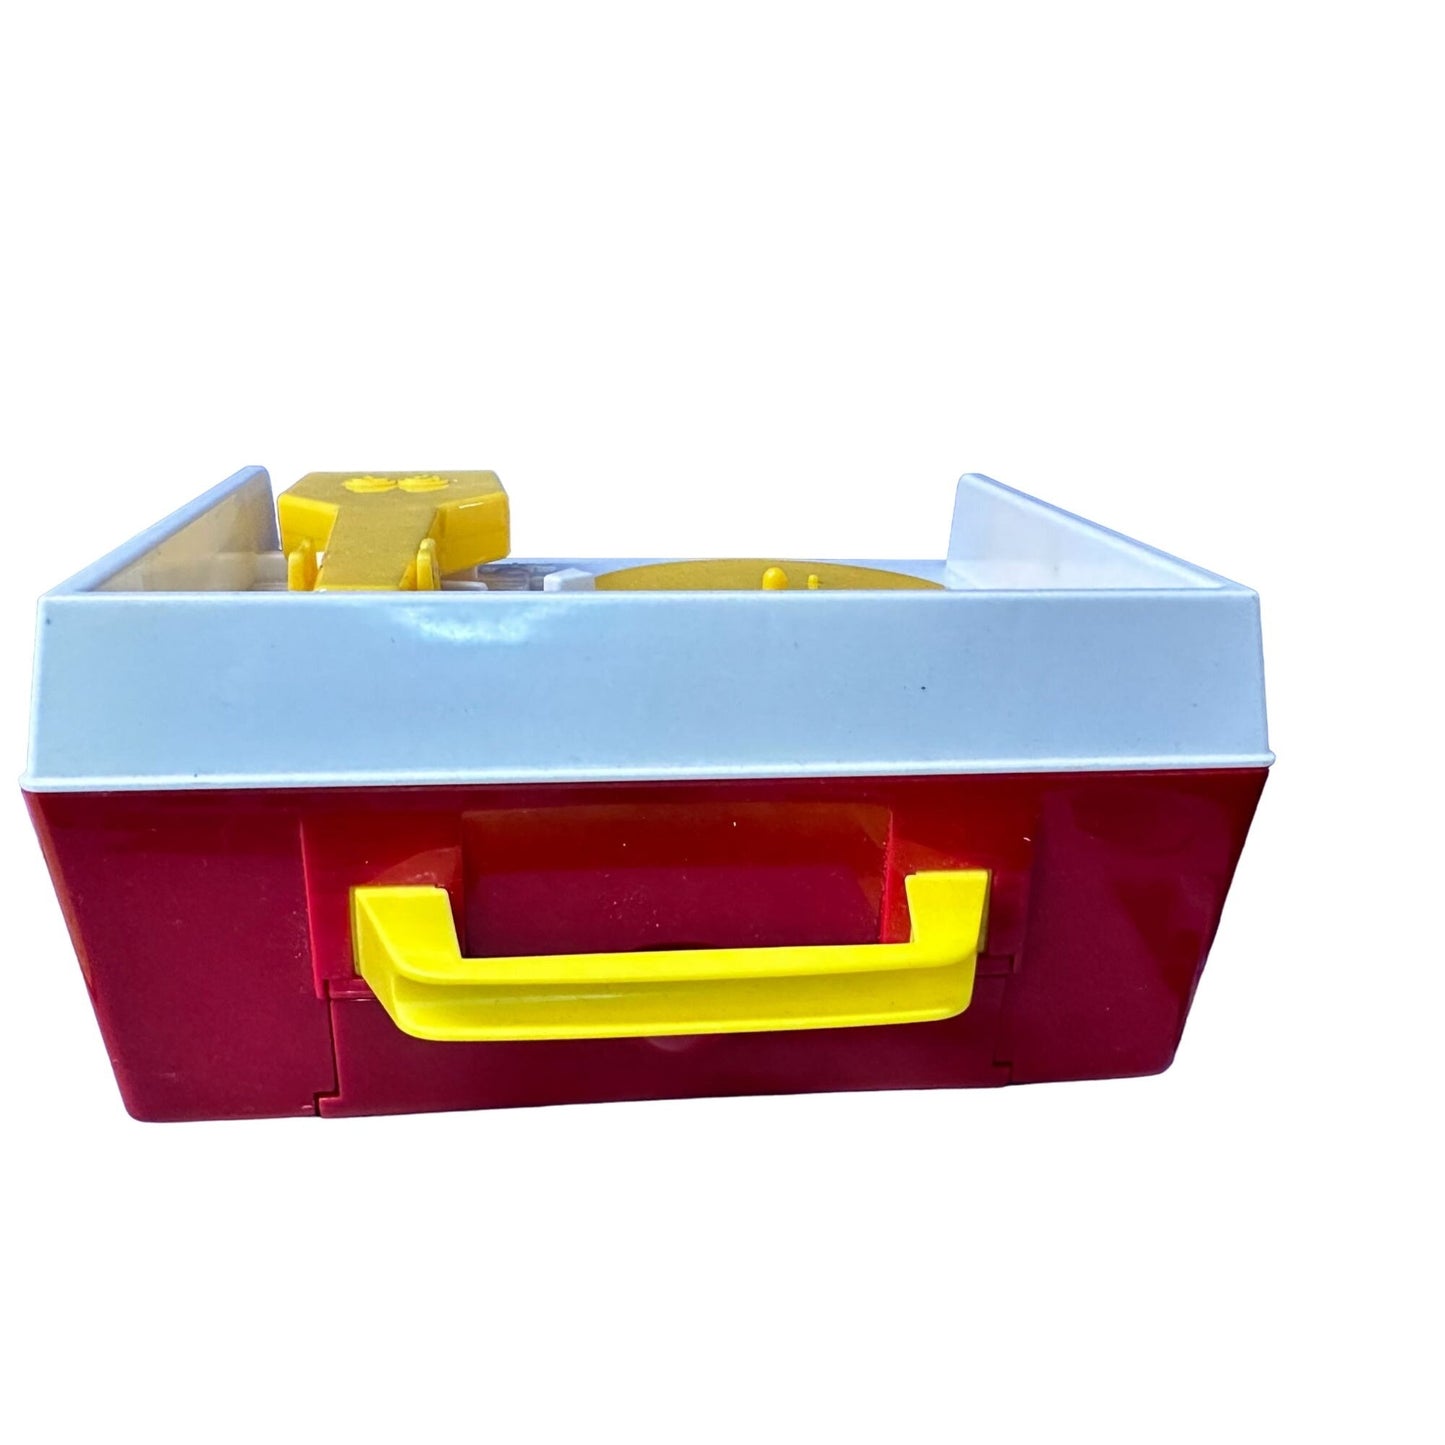 Fisher Price Music Box Record Player Reproduction Classic Toy Red Yellow 2014